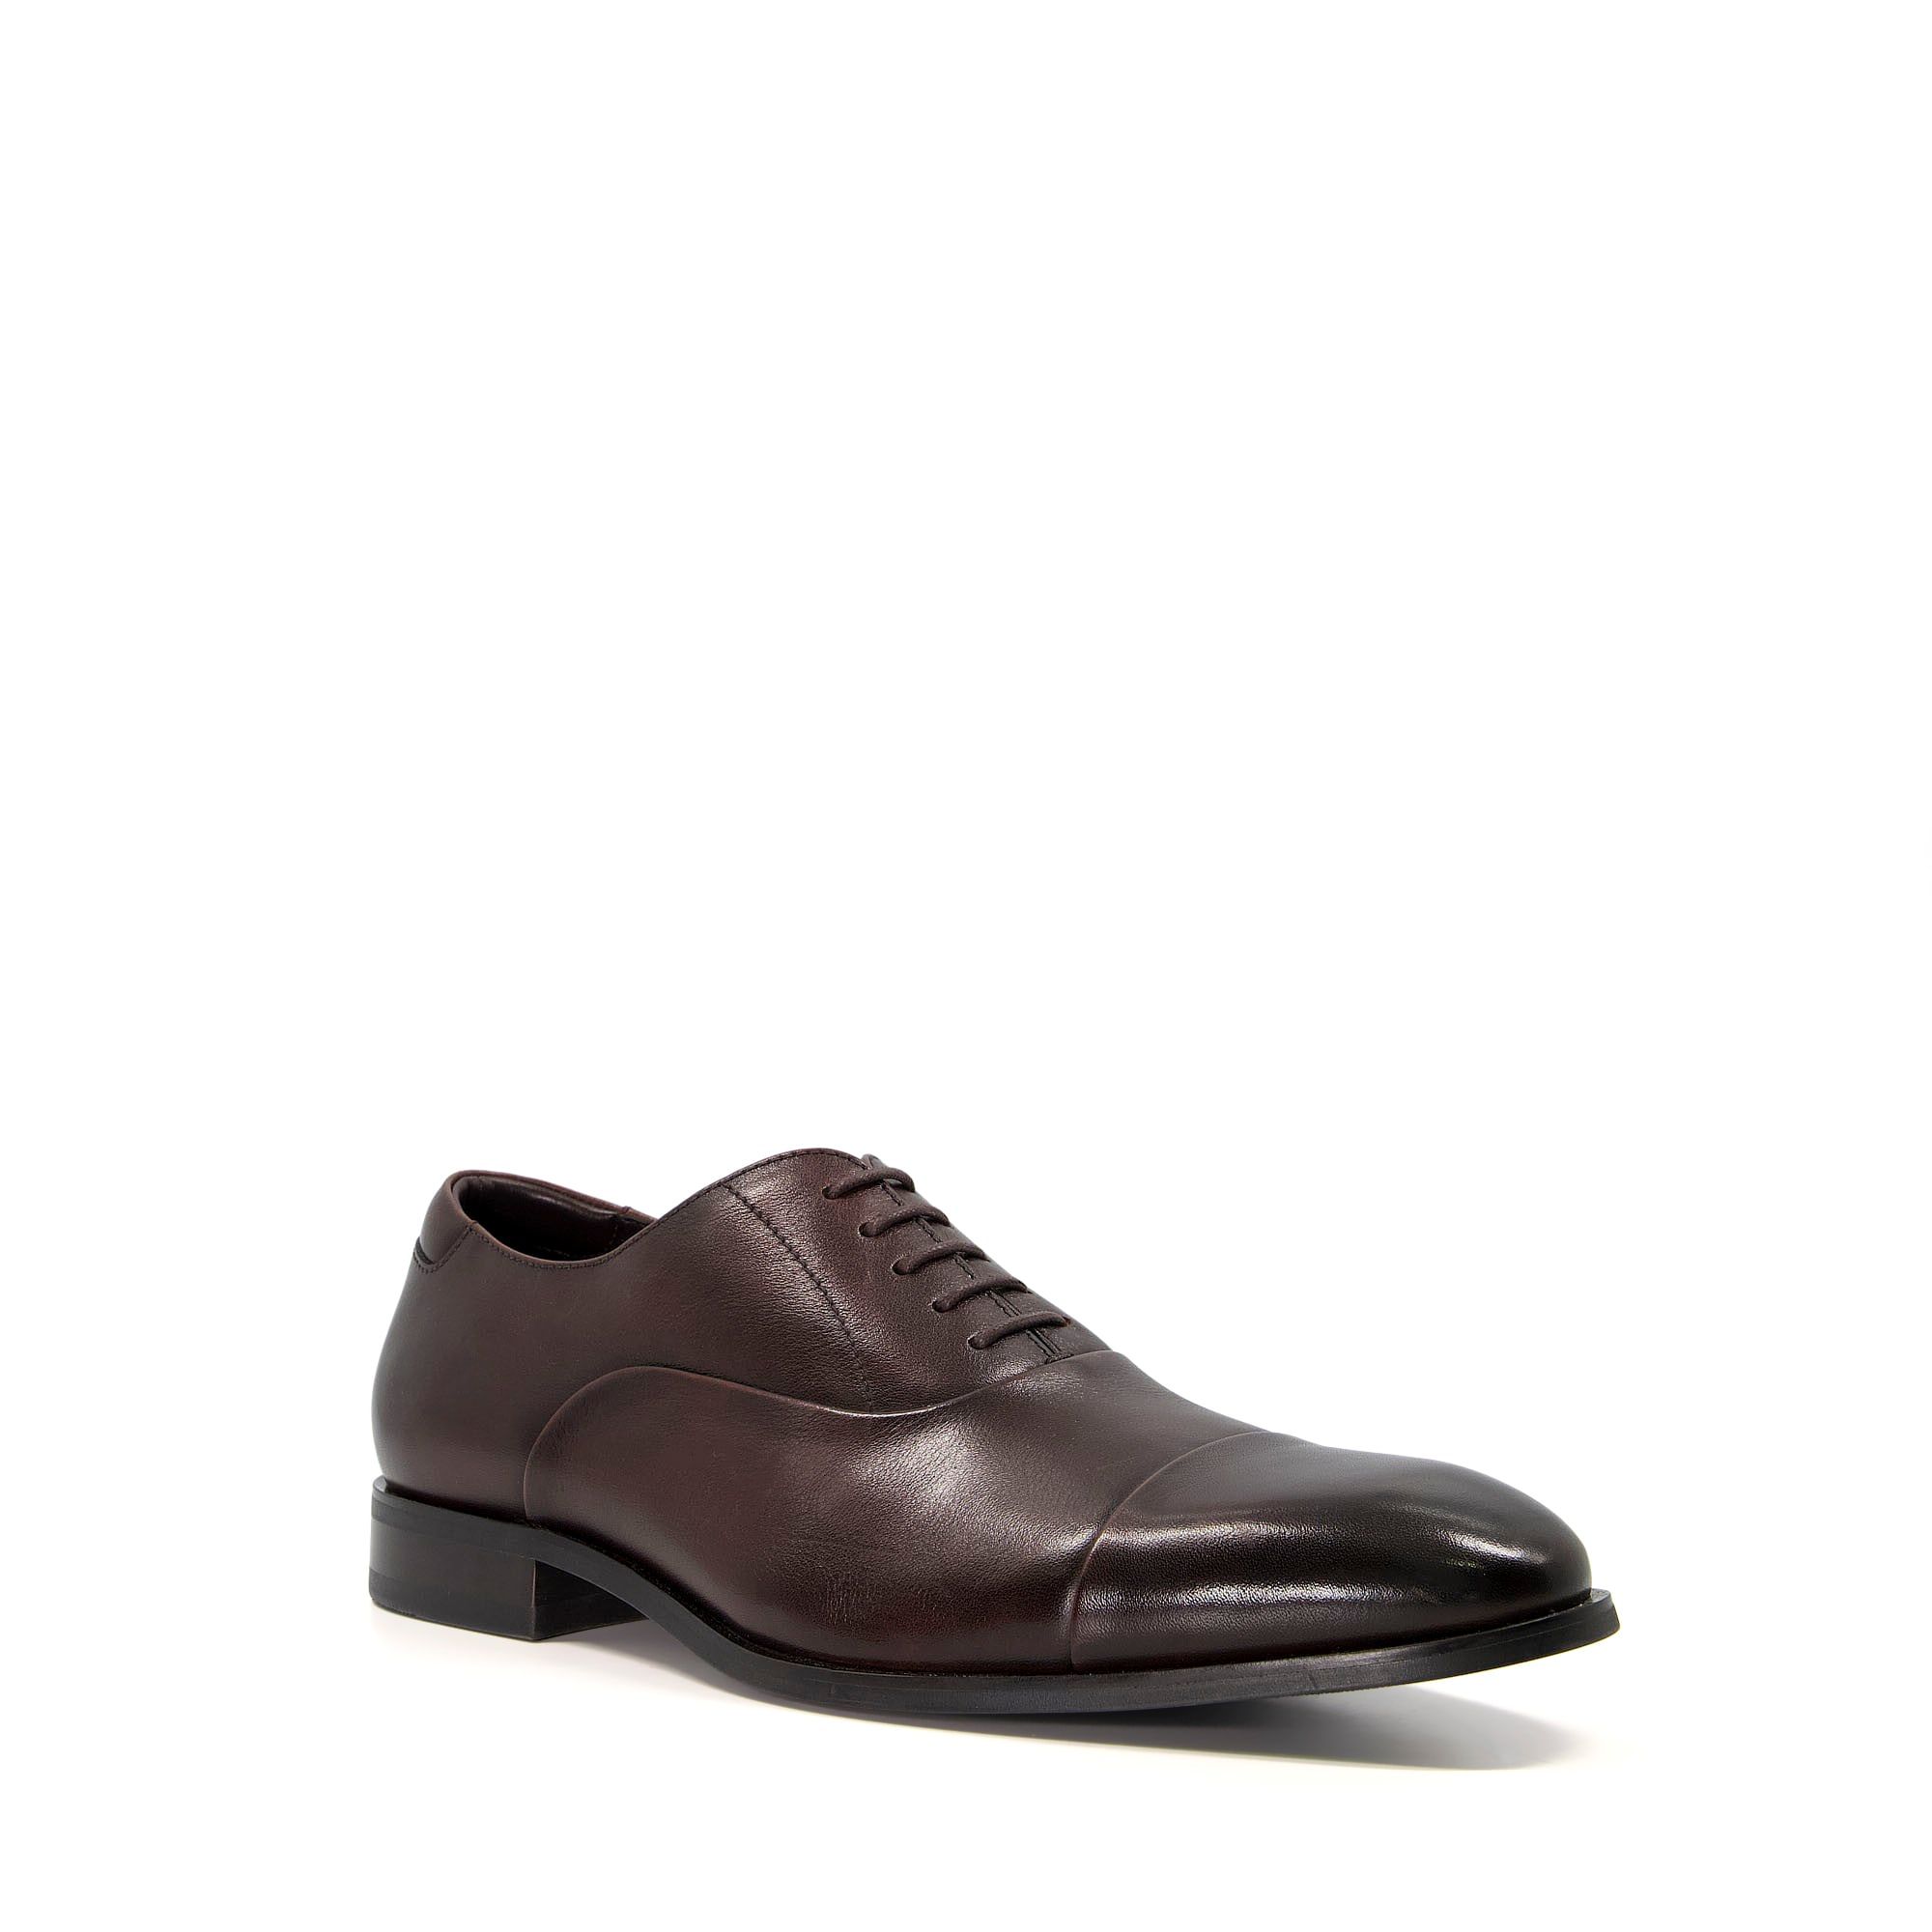 Dune Mens SECRECY Lace-Up Oxford Shoes